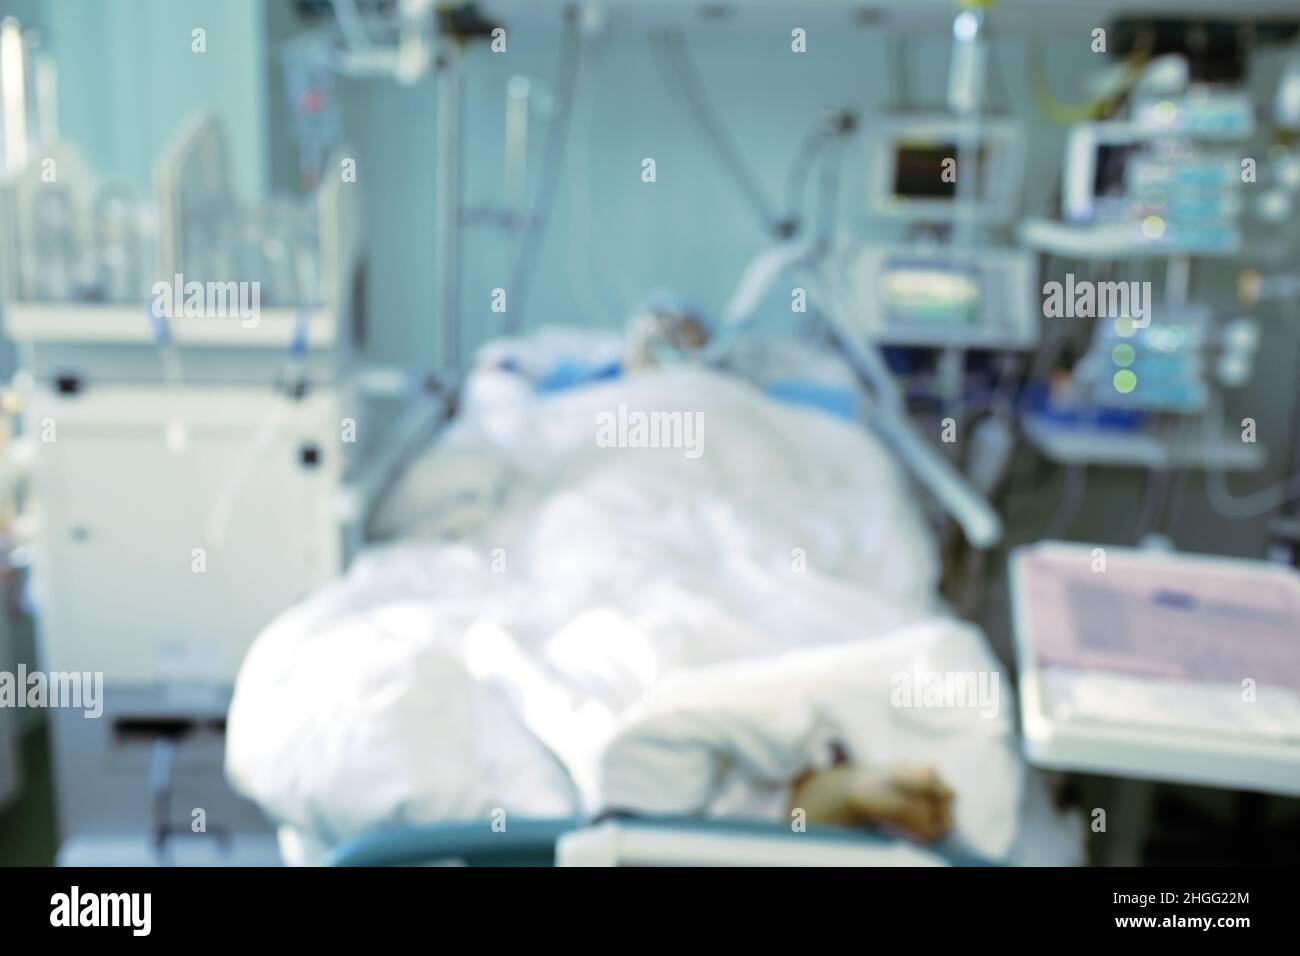 Blurred silhouette of an unconscious man in the hospital bed, unfocused background. Stock Photo